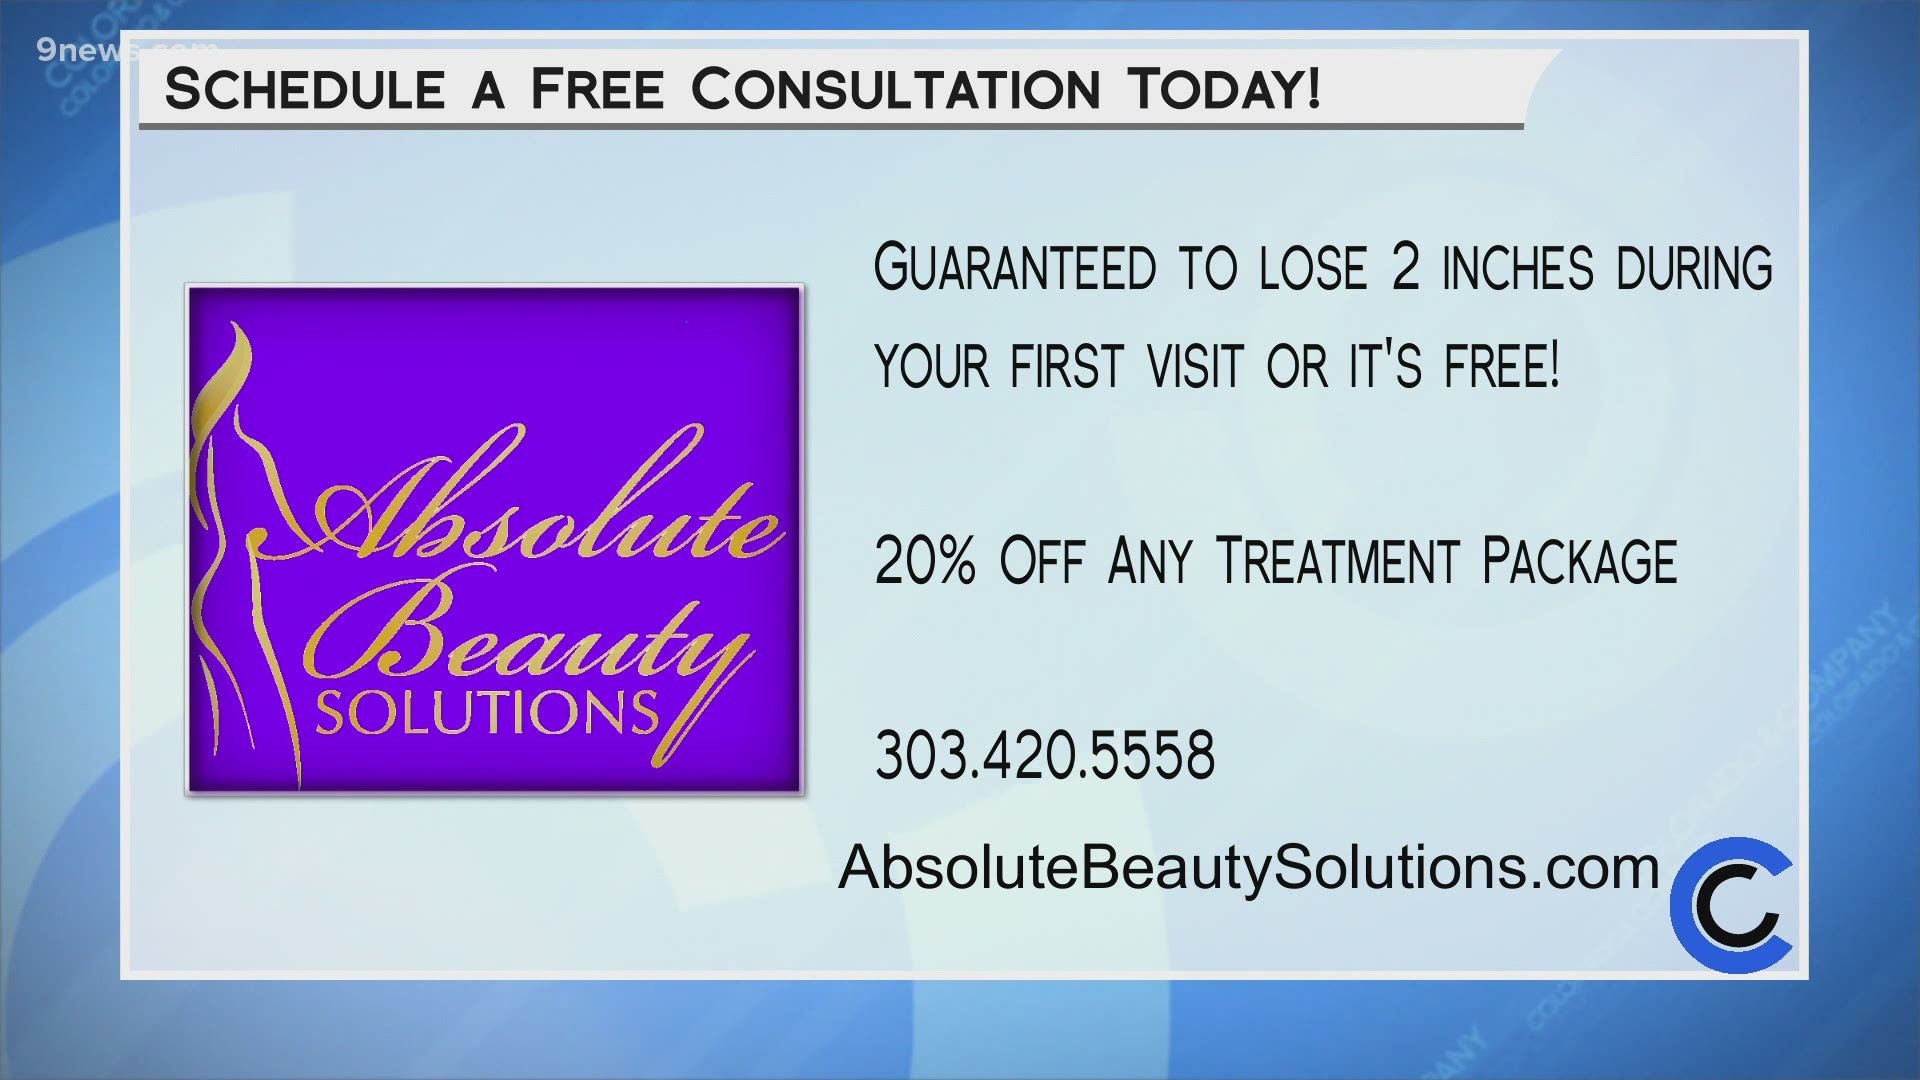 Lose two inches with ultra slim during your first visit or its free! Visit AbsoluteBeautySolutions.com or call 303.420.5558 to learn more and get started.